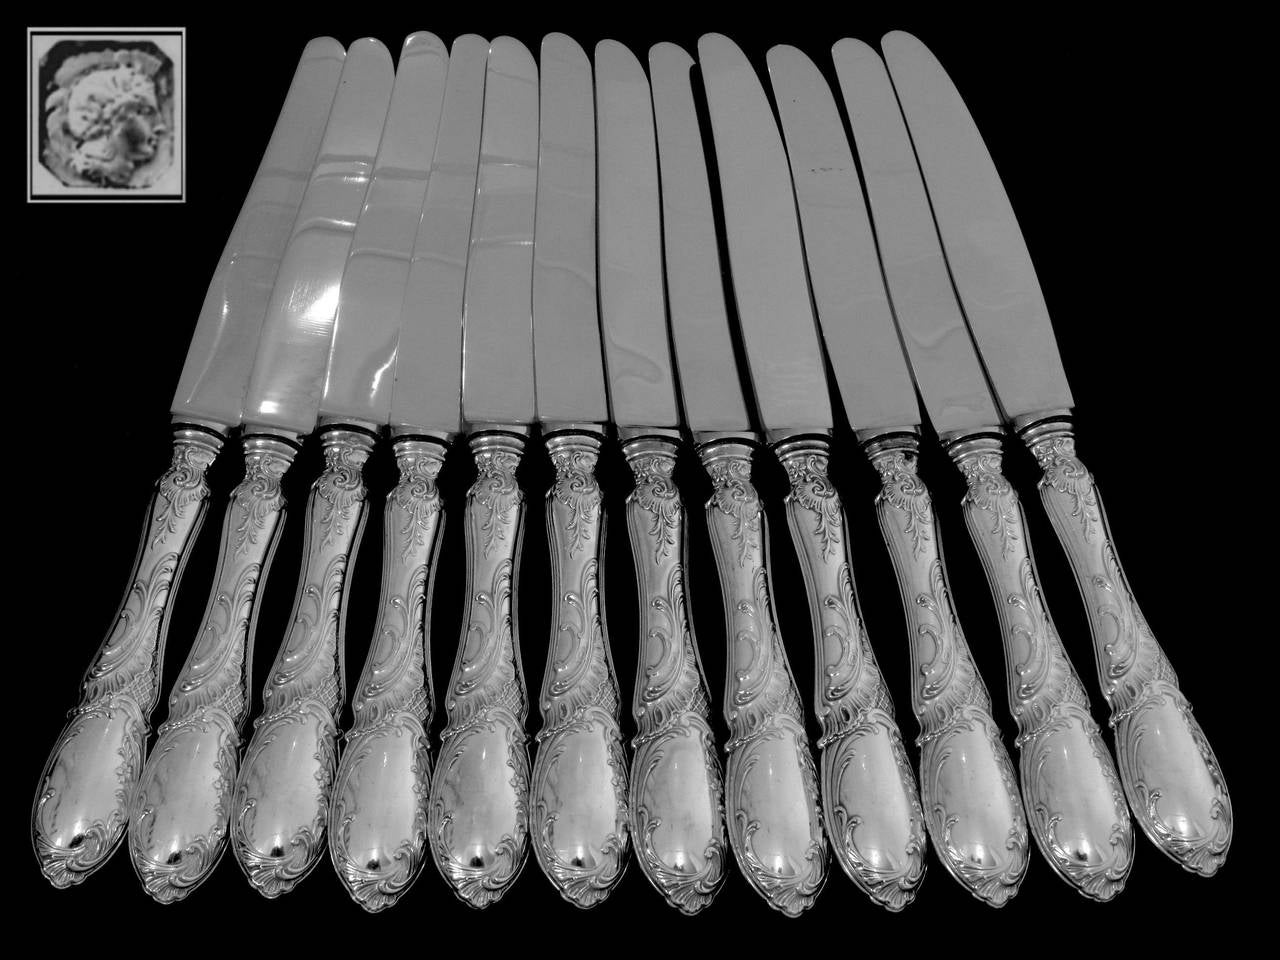 French Sterling Silver Dinner Knife Set 12 pc Rococo, Stainless Steel Blades

Head of Minerve 1 st titre on the handles for 950/1000 French Sterling Silver guarantee and Stainless Steel Blades engraved Nogent Inox.

The design and workmanship of